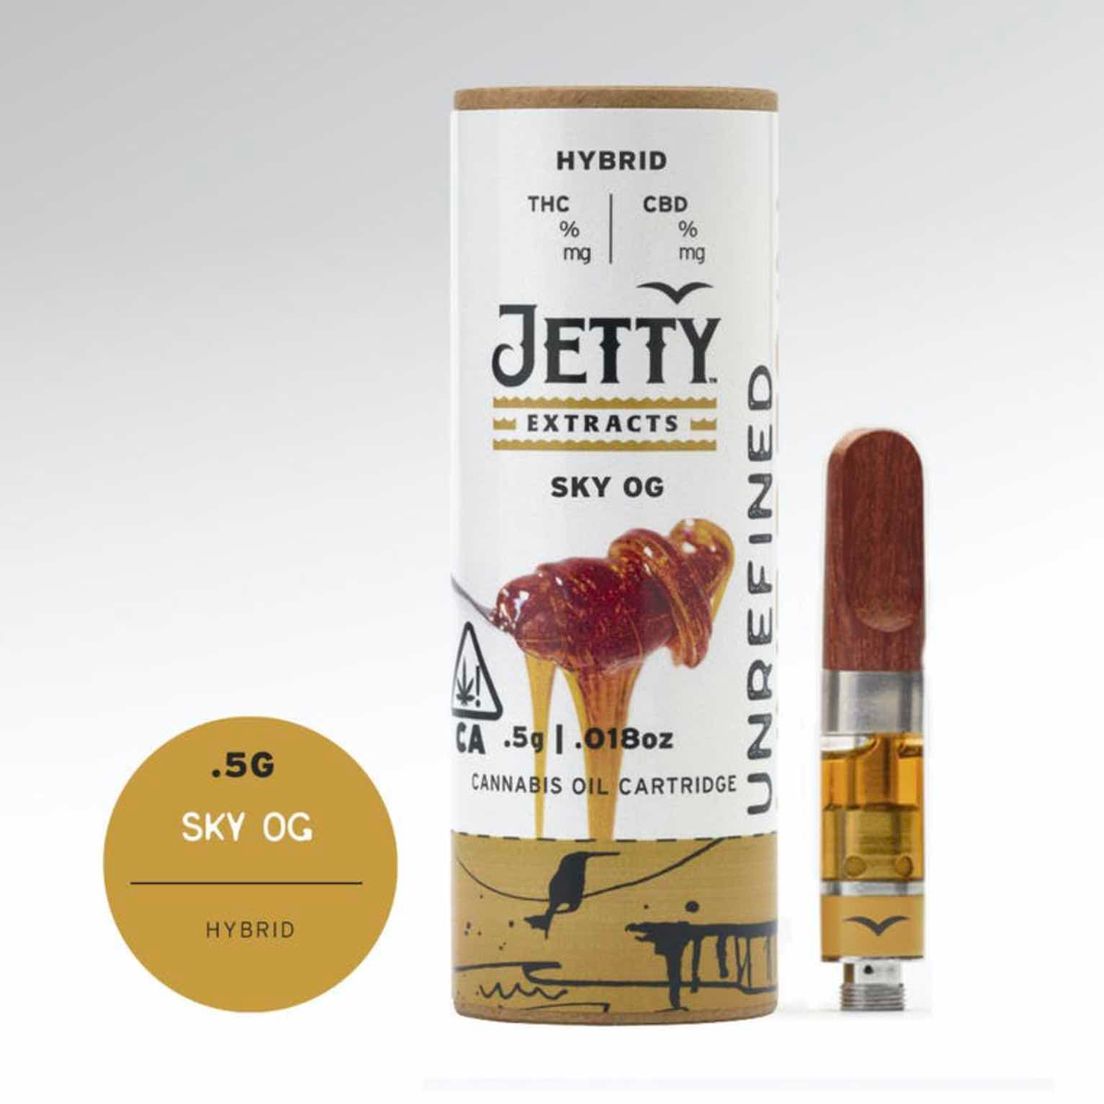 .5g Sky OG Live Resin Cart - JETTY EXTRACTS